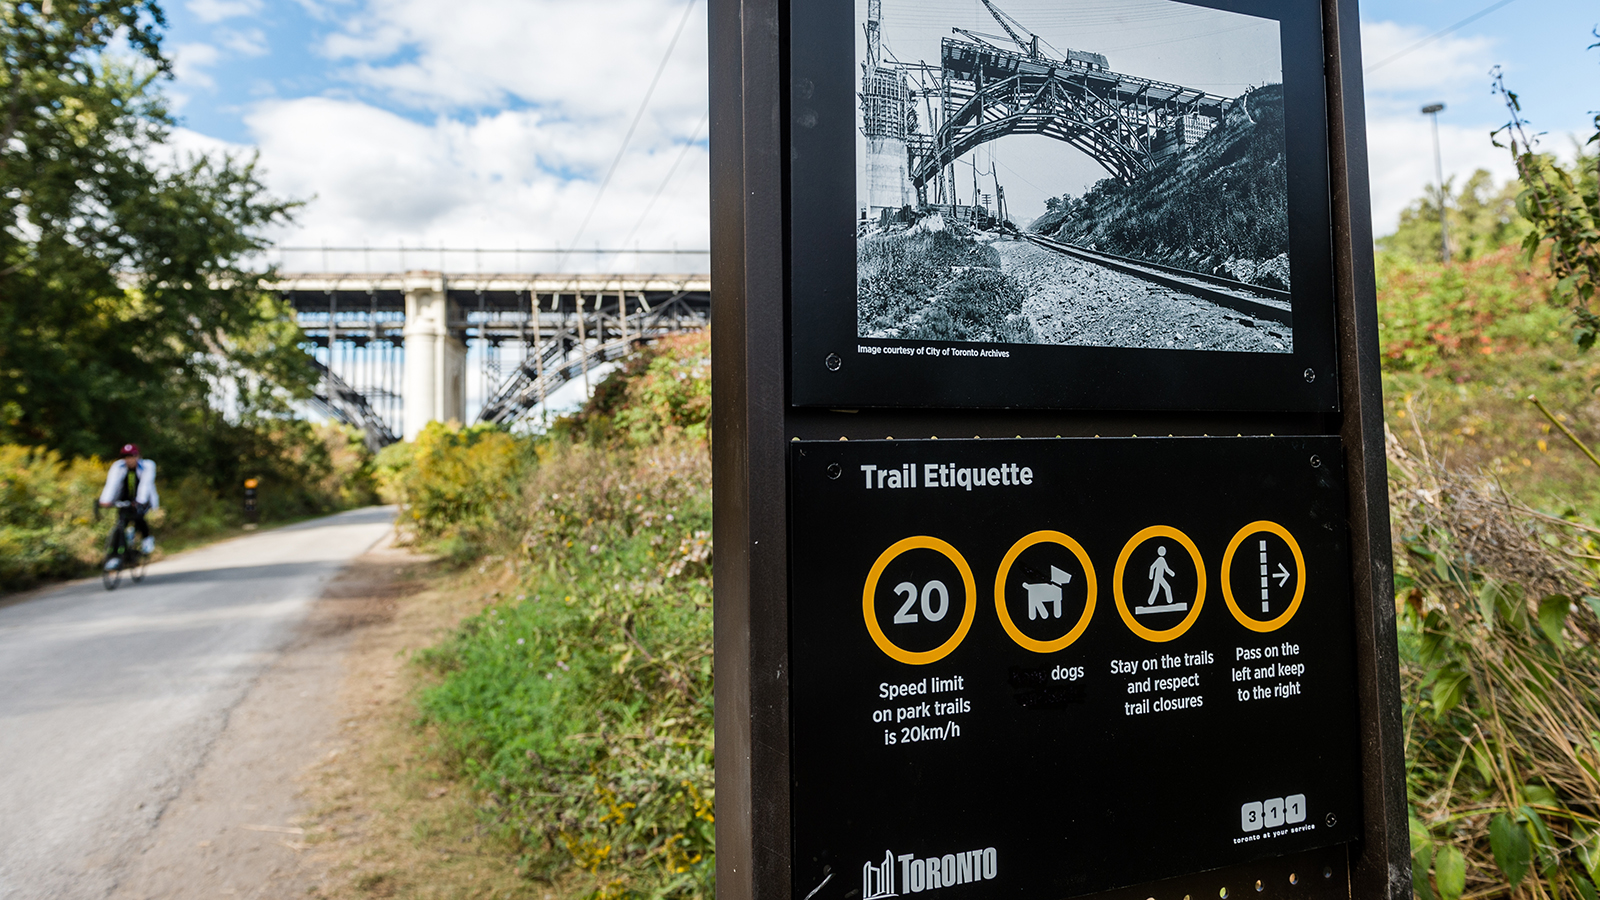 Wayfinding signage at the Lower Don Trail leading to the Prince Edward Viaduct